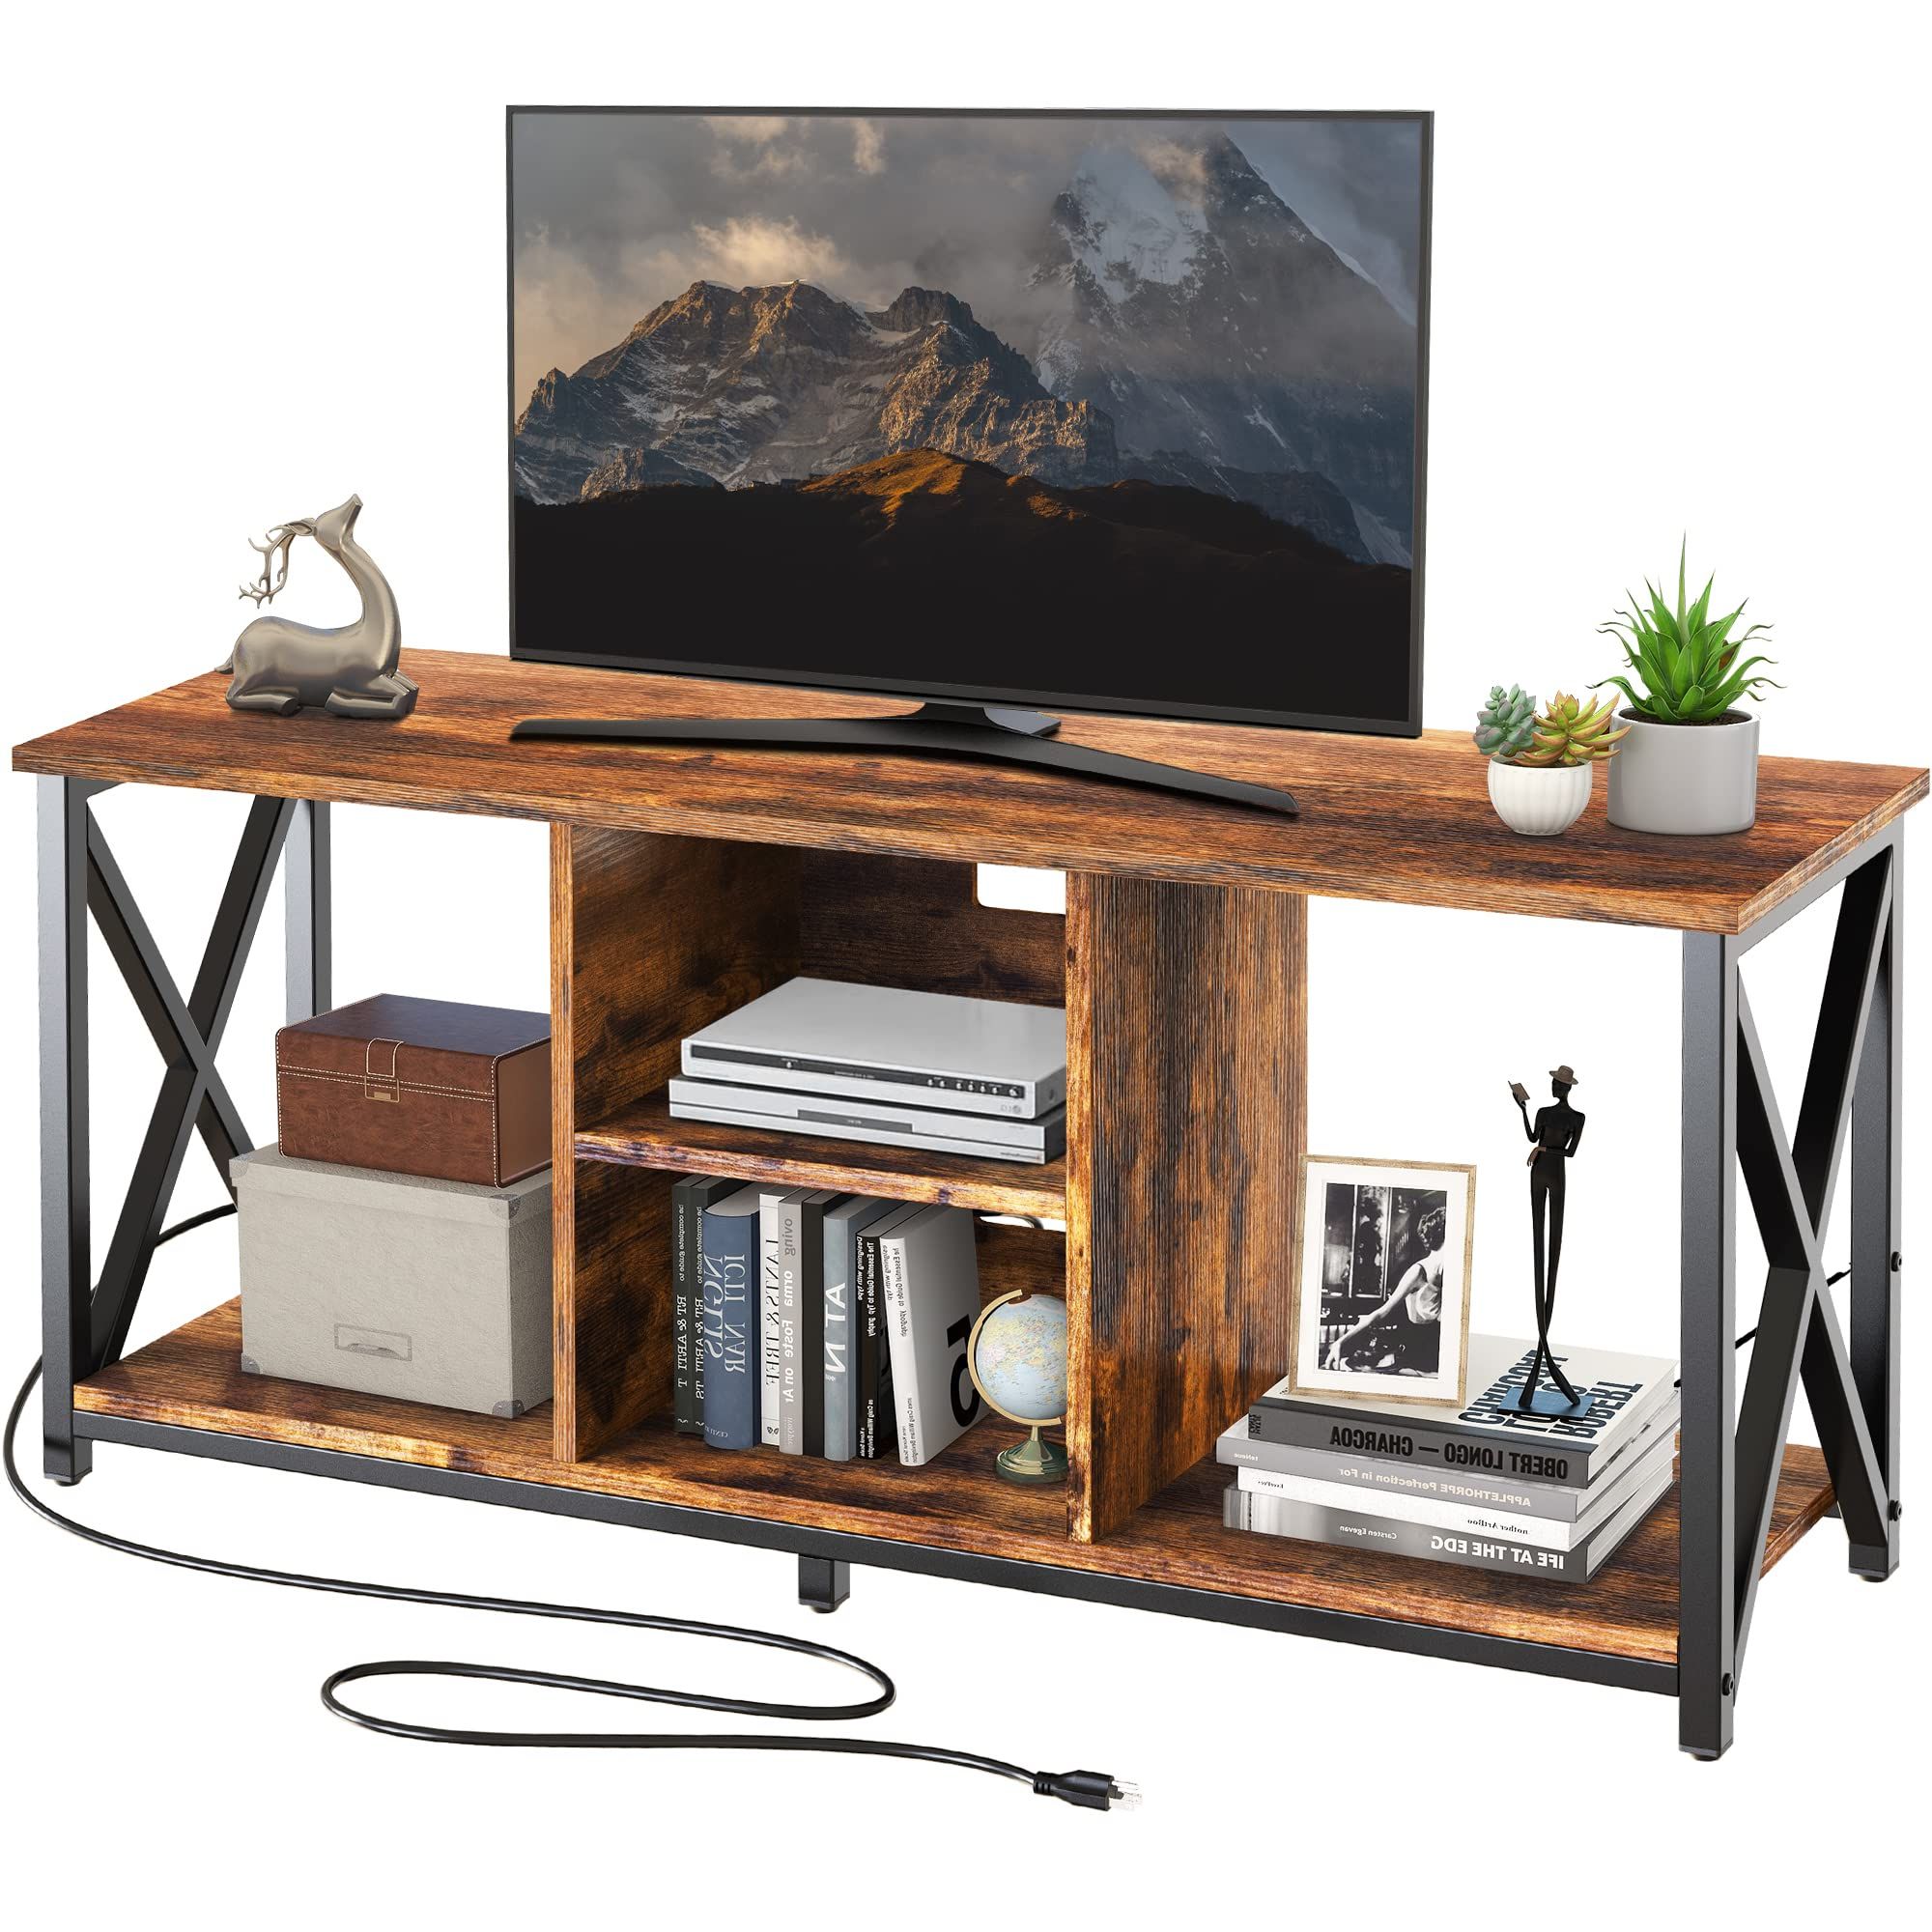 Widely Used Amazon: Fabato Wood Tv Stand With Charging Station For Tv Up To 65 Inch  With Storage Shelves Entertainment Center Tv Cabinet With Metal Frame  Rustic Brown : Home & Kitchen With Tv Stands With Charging Station (View 1 of 10)